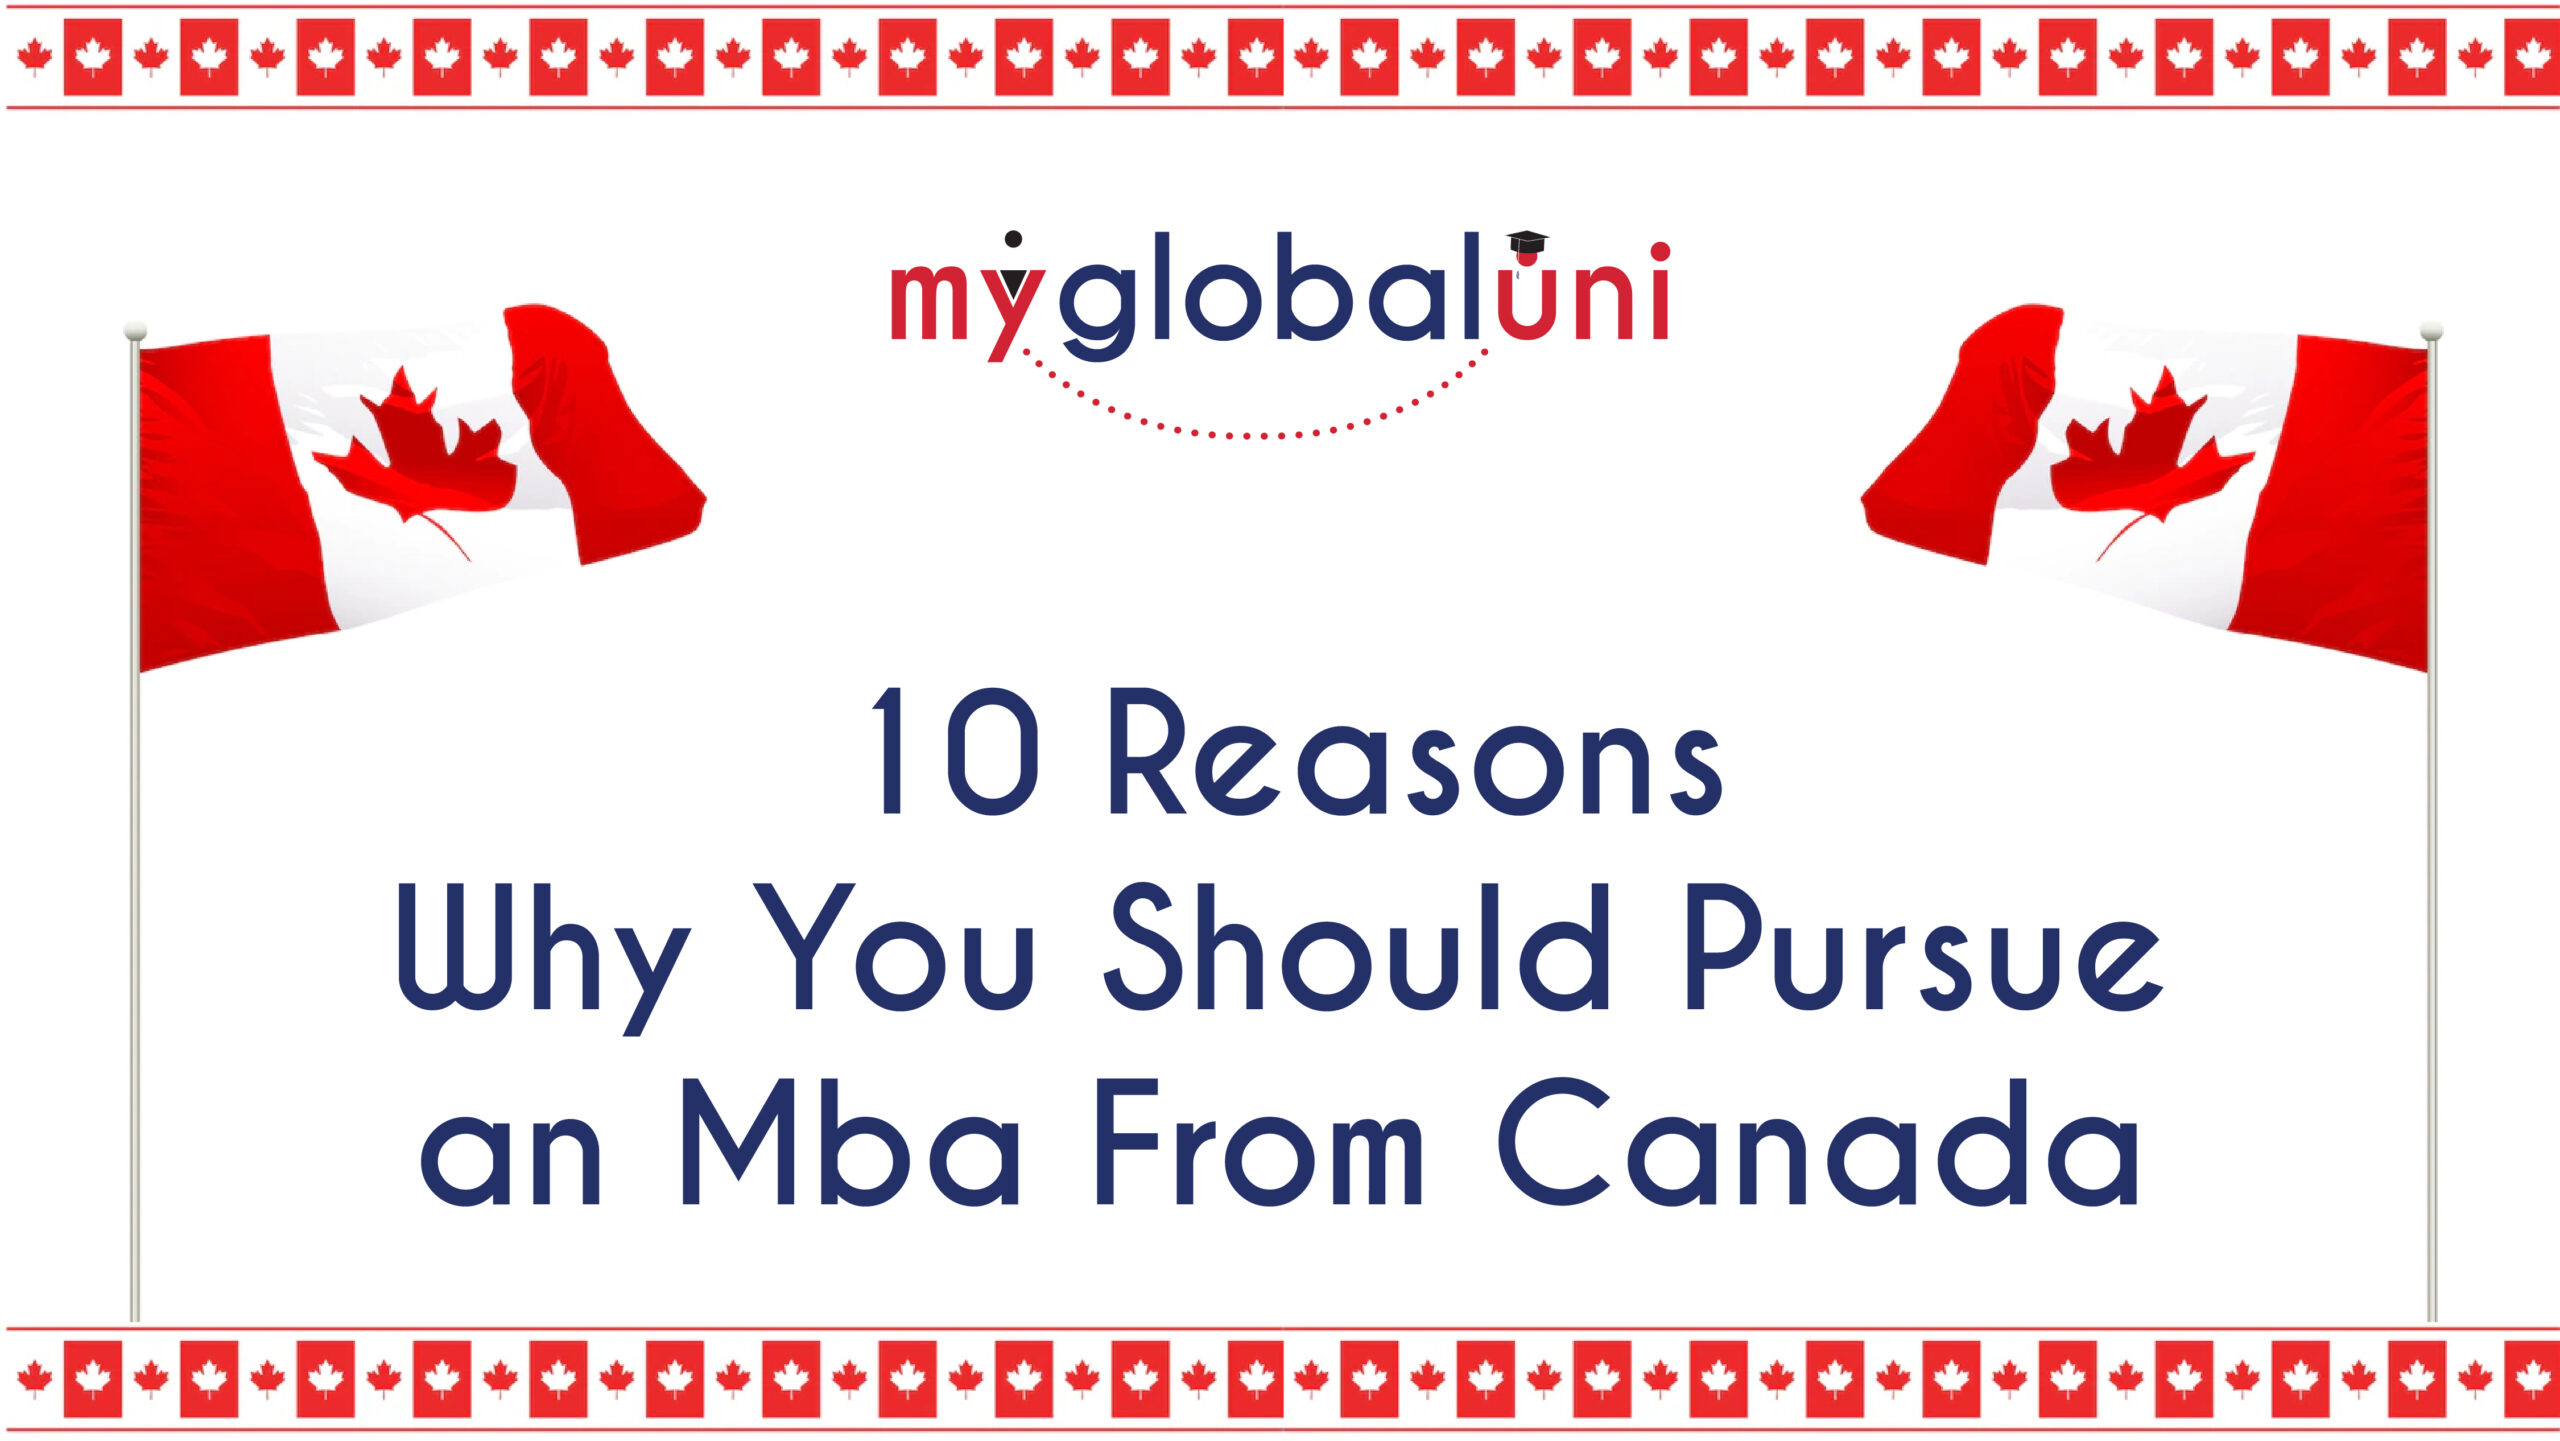 10 Reasons Why You Should Pursue an MBA Degree from Canada